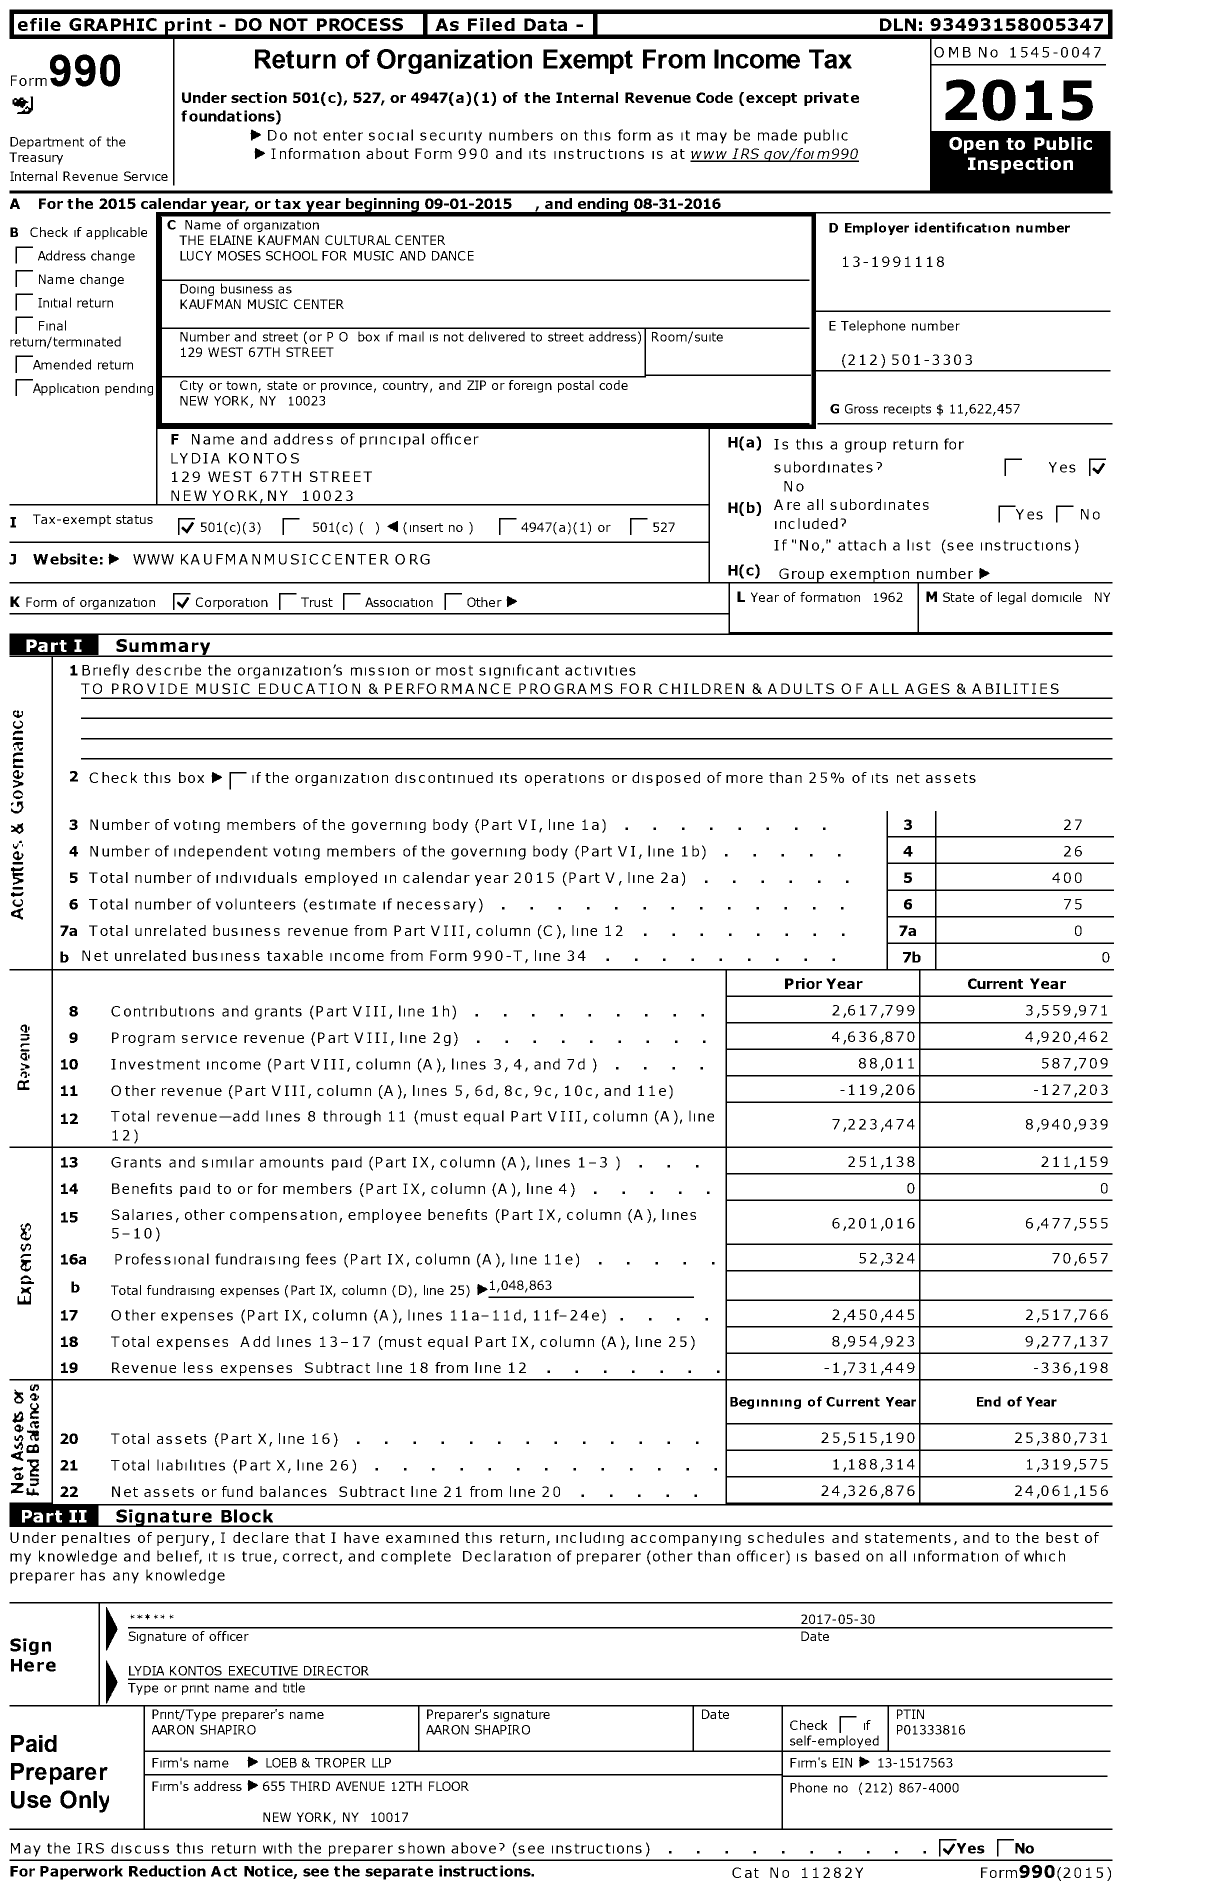 Image of first page of 2015 Form 990 for Kaufman Music Center